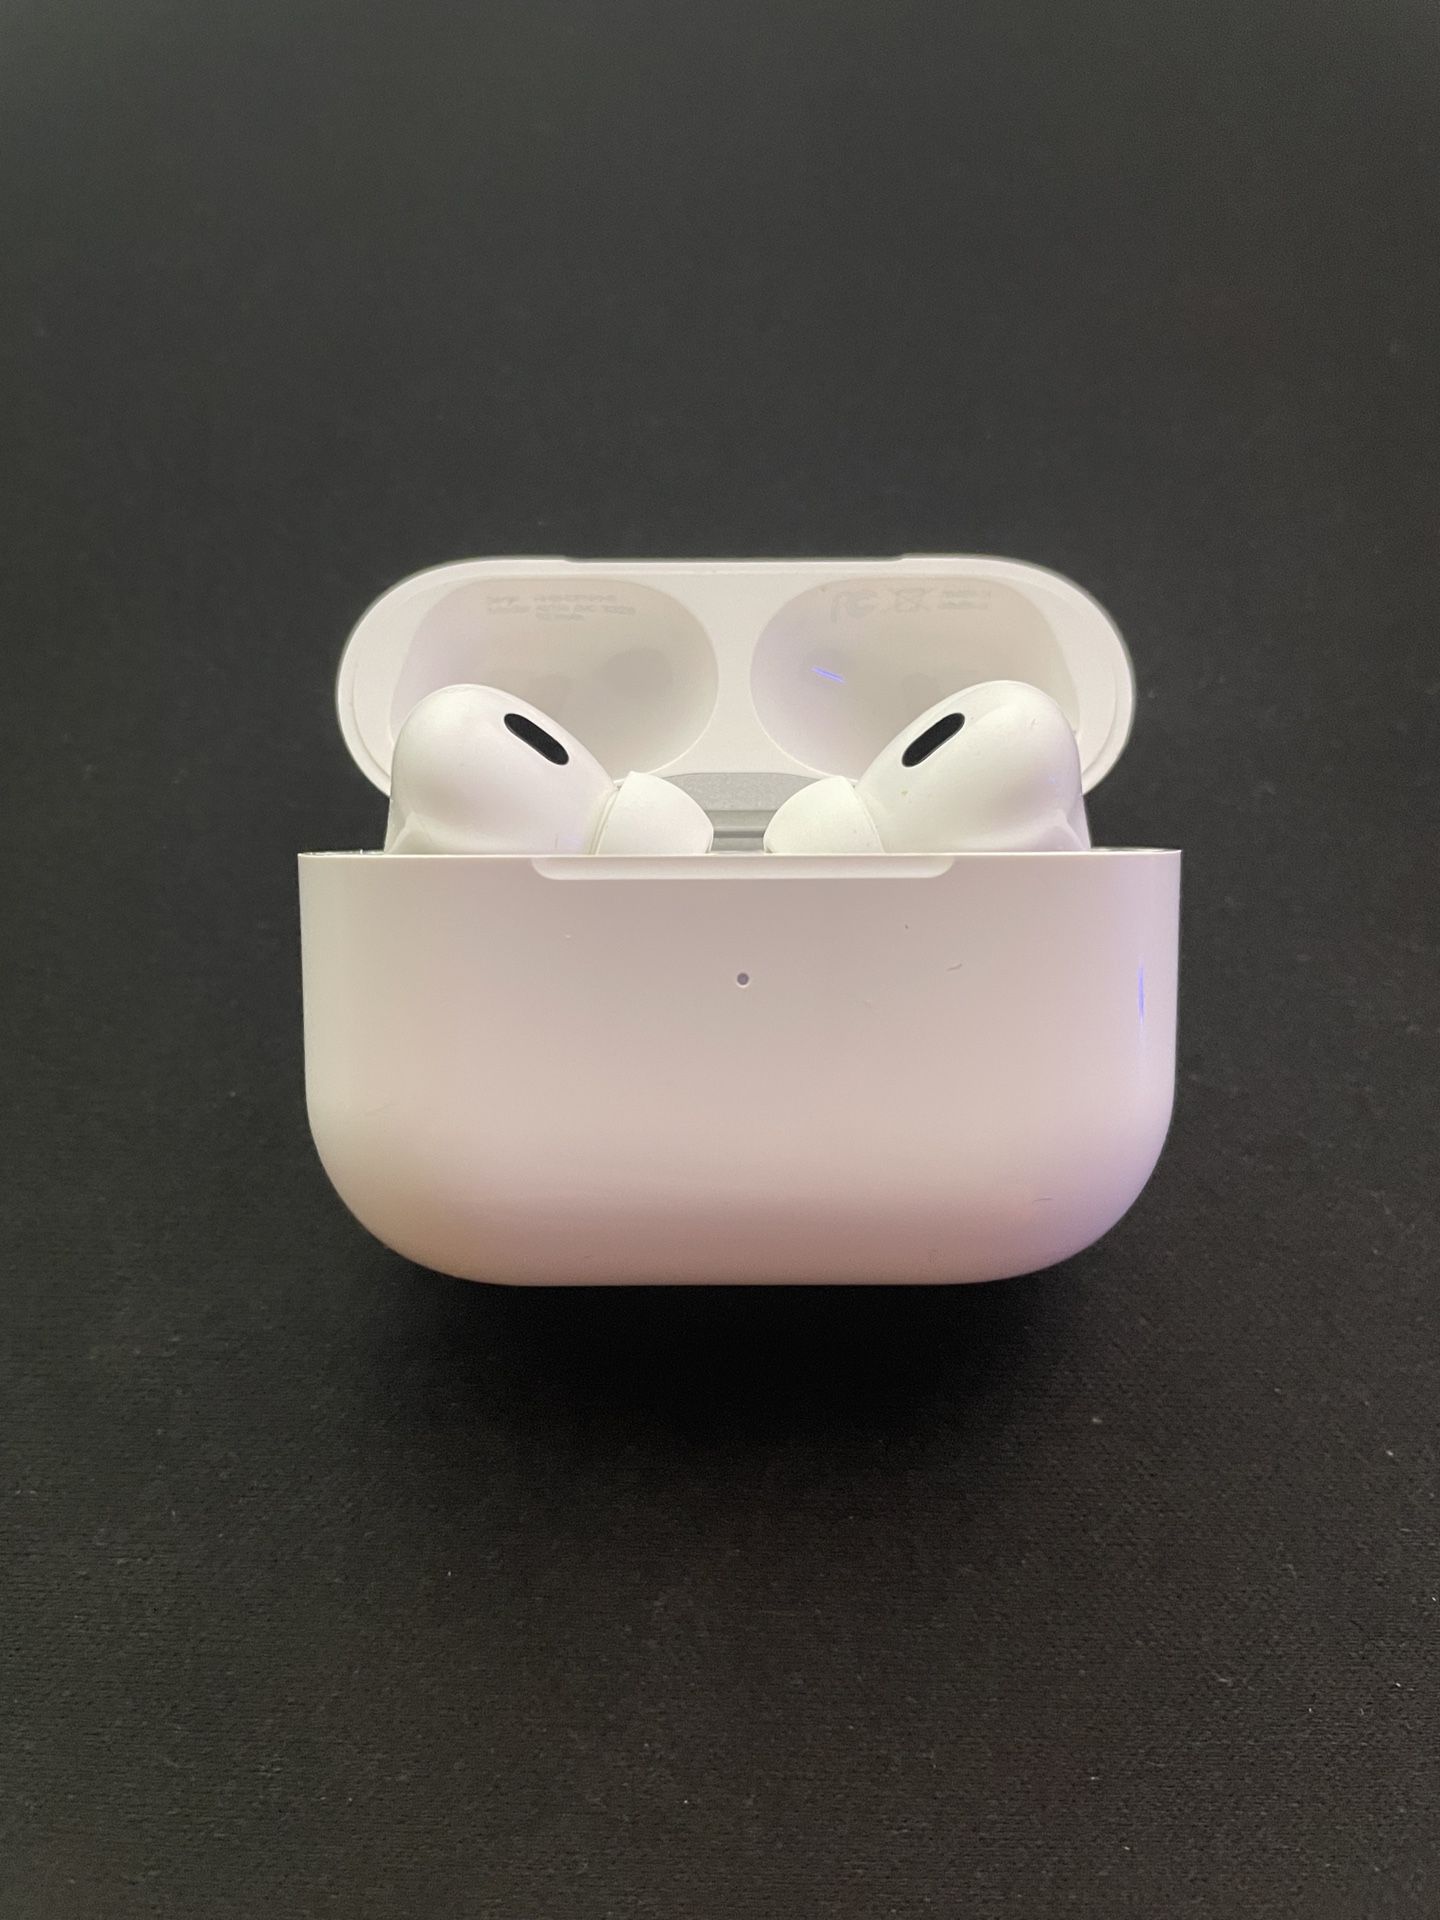 Apple AirPods Pro 2nd Generation with Charging Case - White